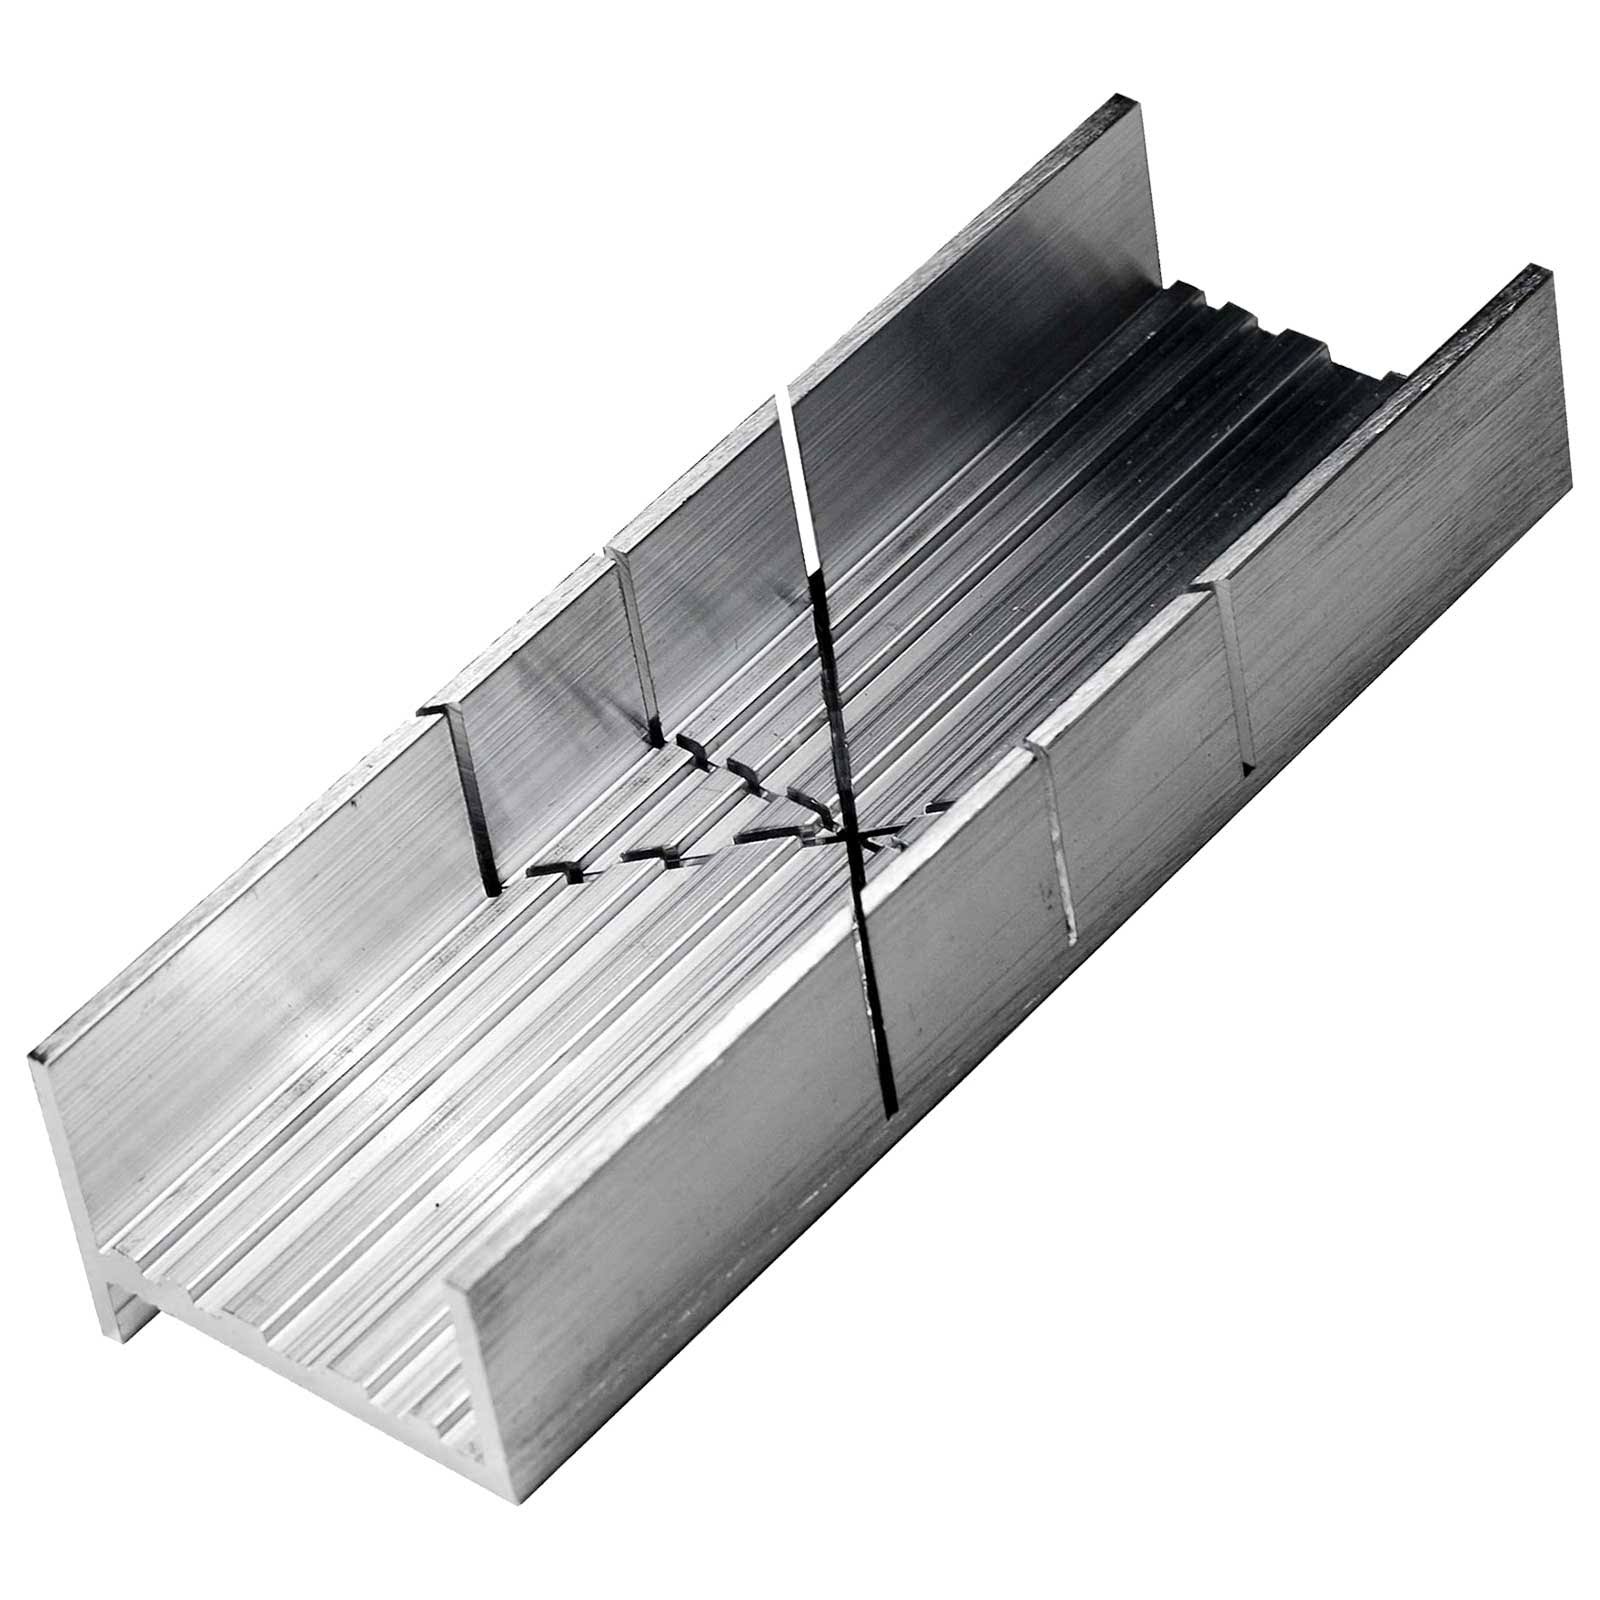 Metal Mitre Box By Excel Blades Aluminium And Steel Construction M